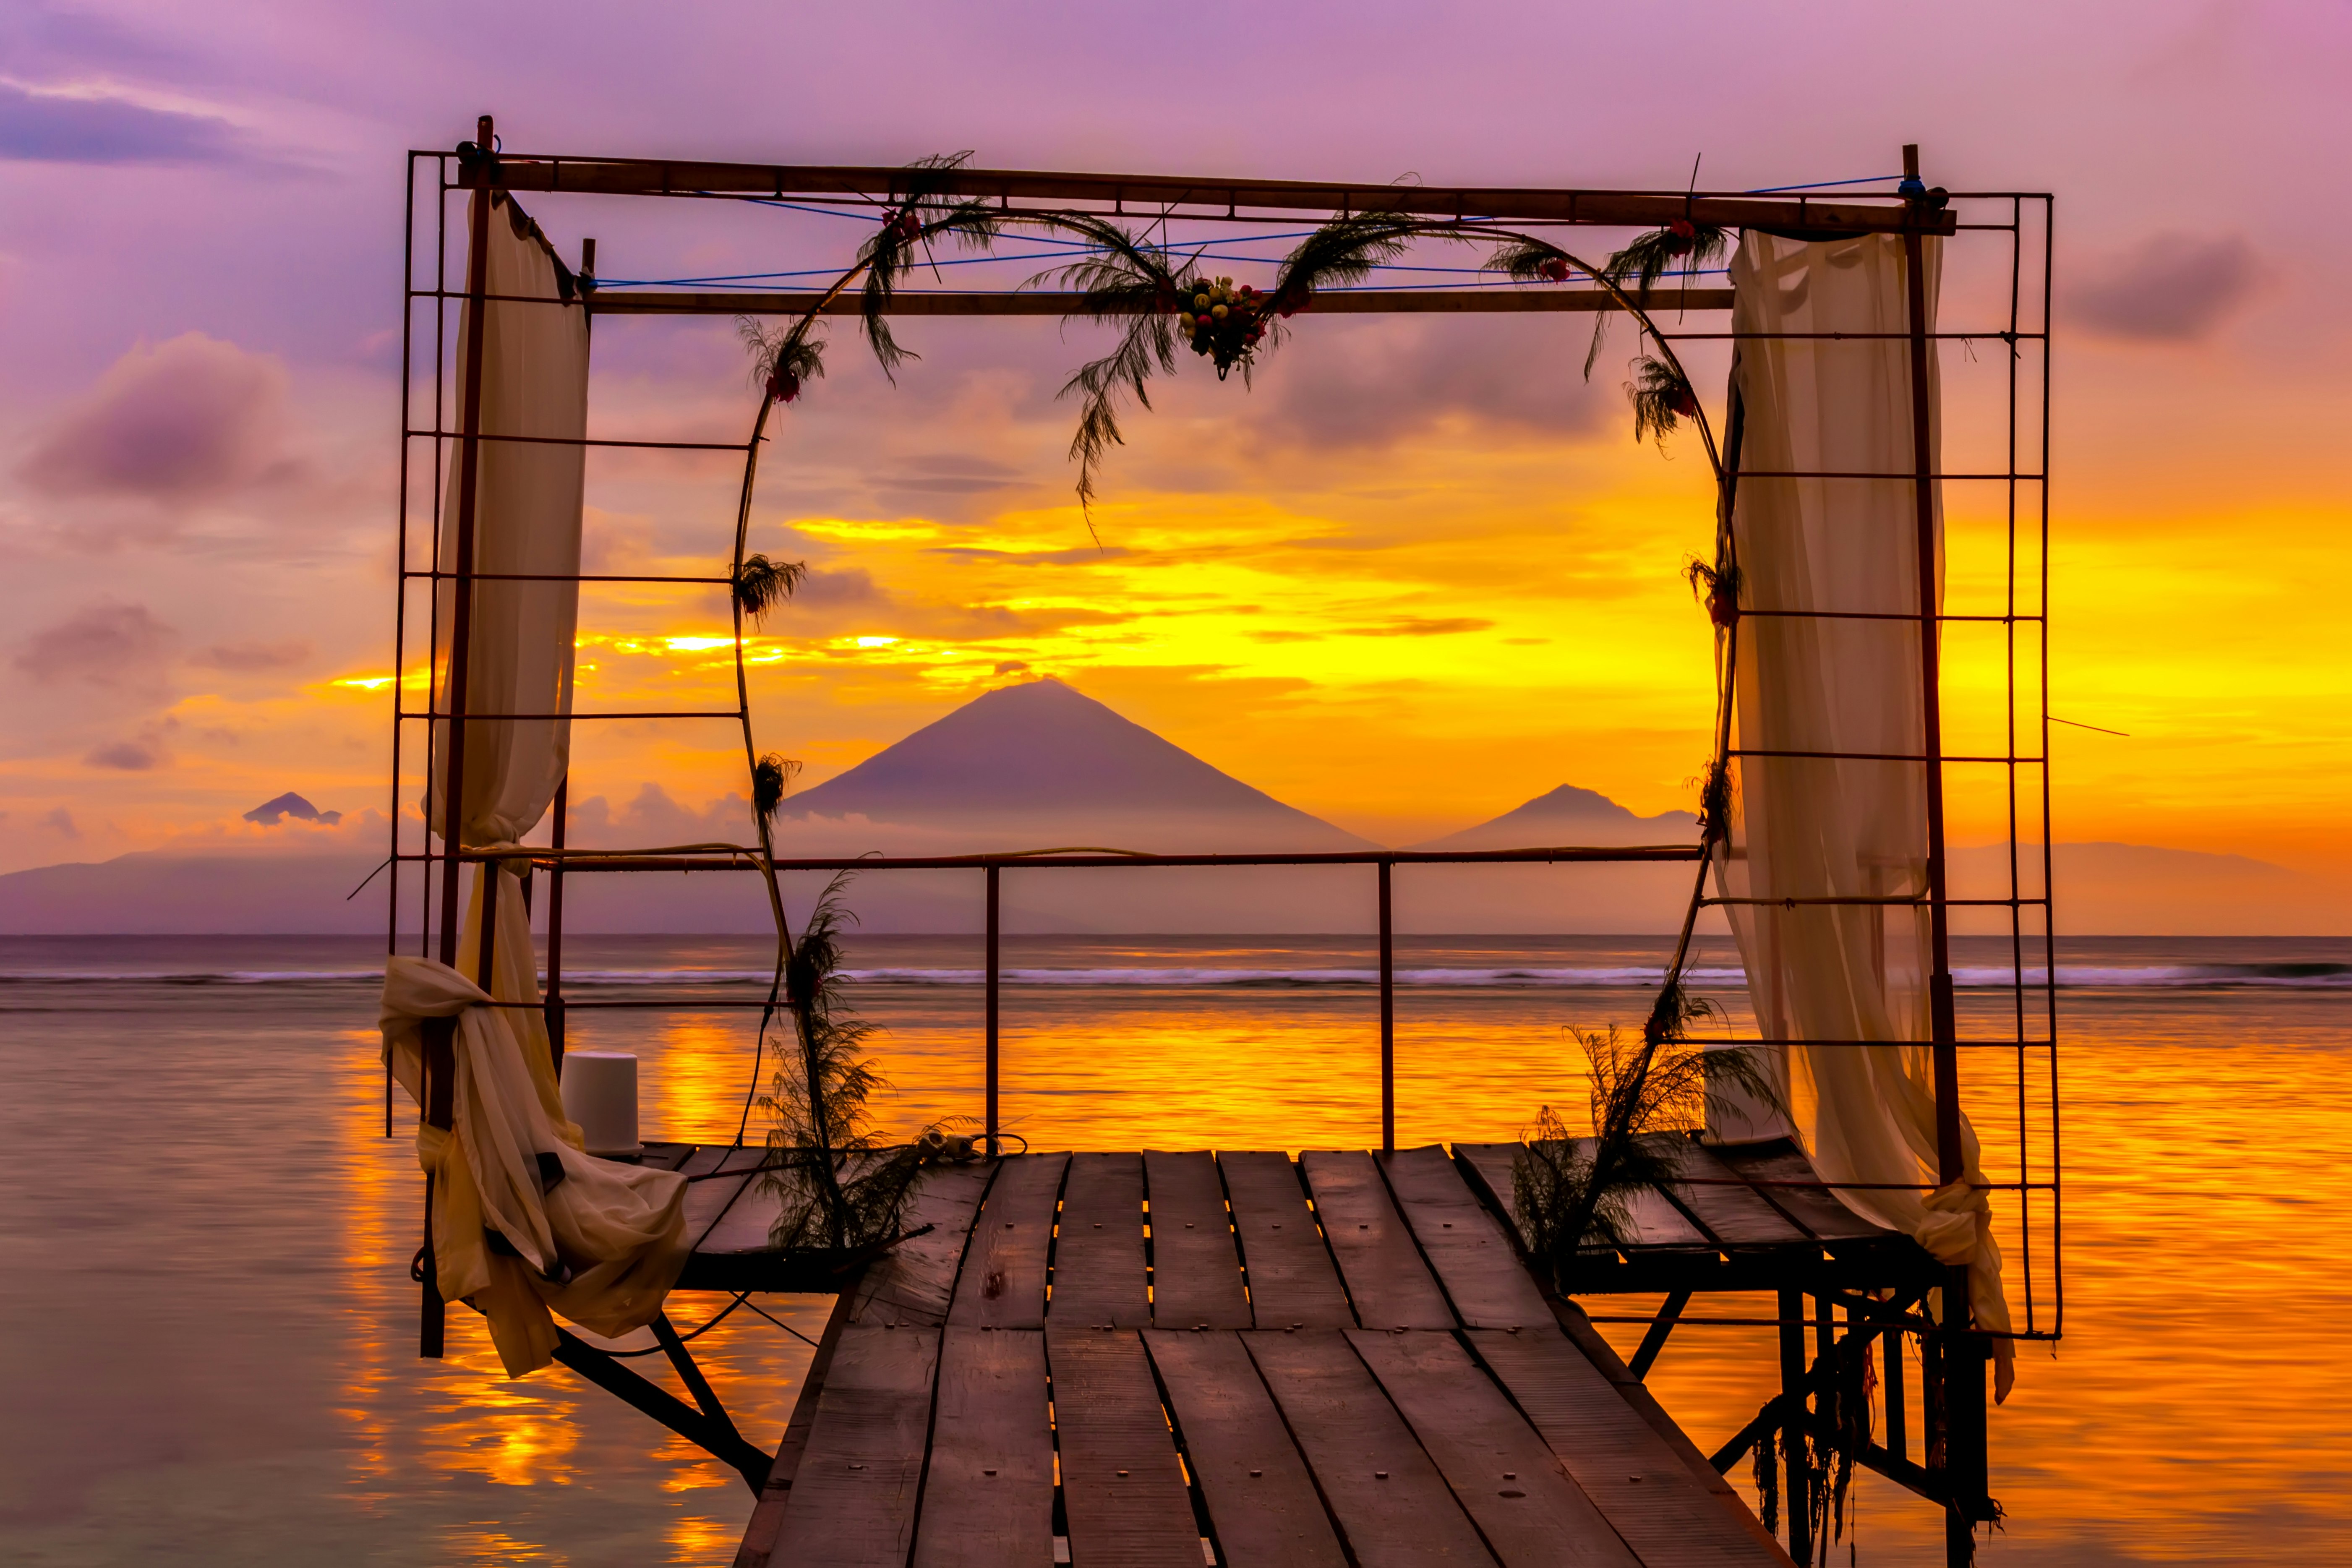 A sunset scene of a rustic wire altar on a jetty jutting out over the water in the Gili Islands, Lombok.